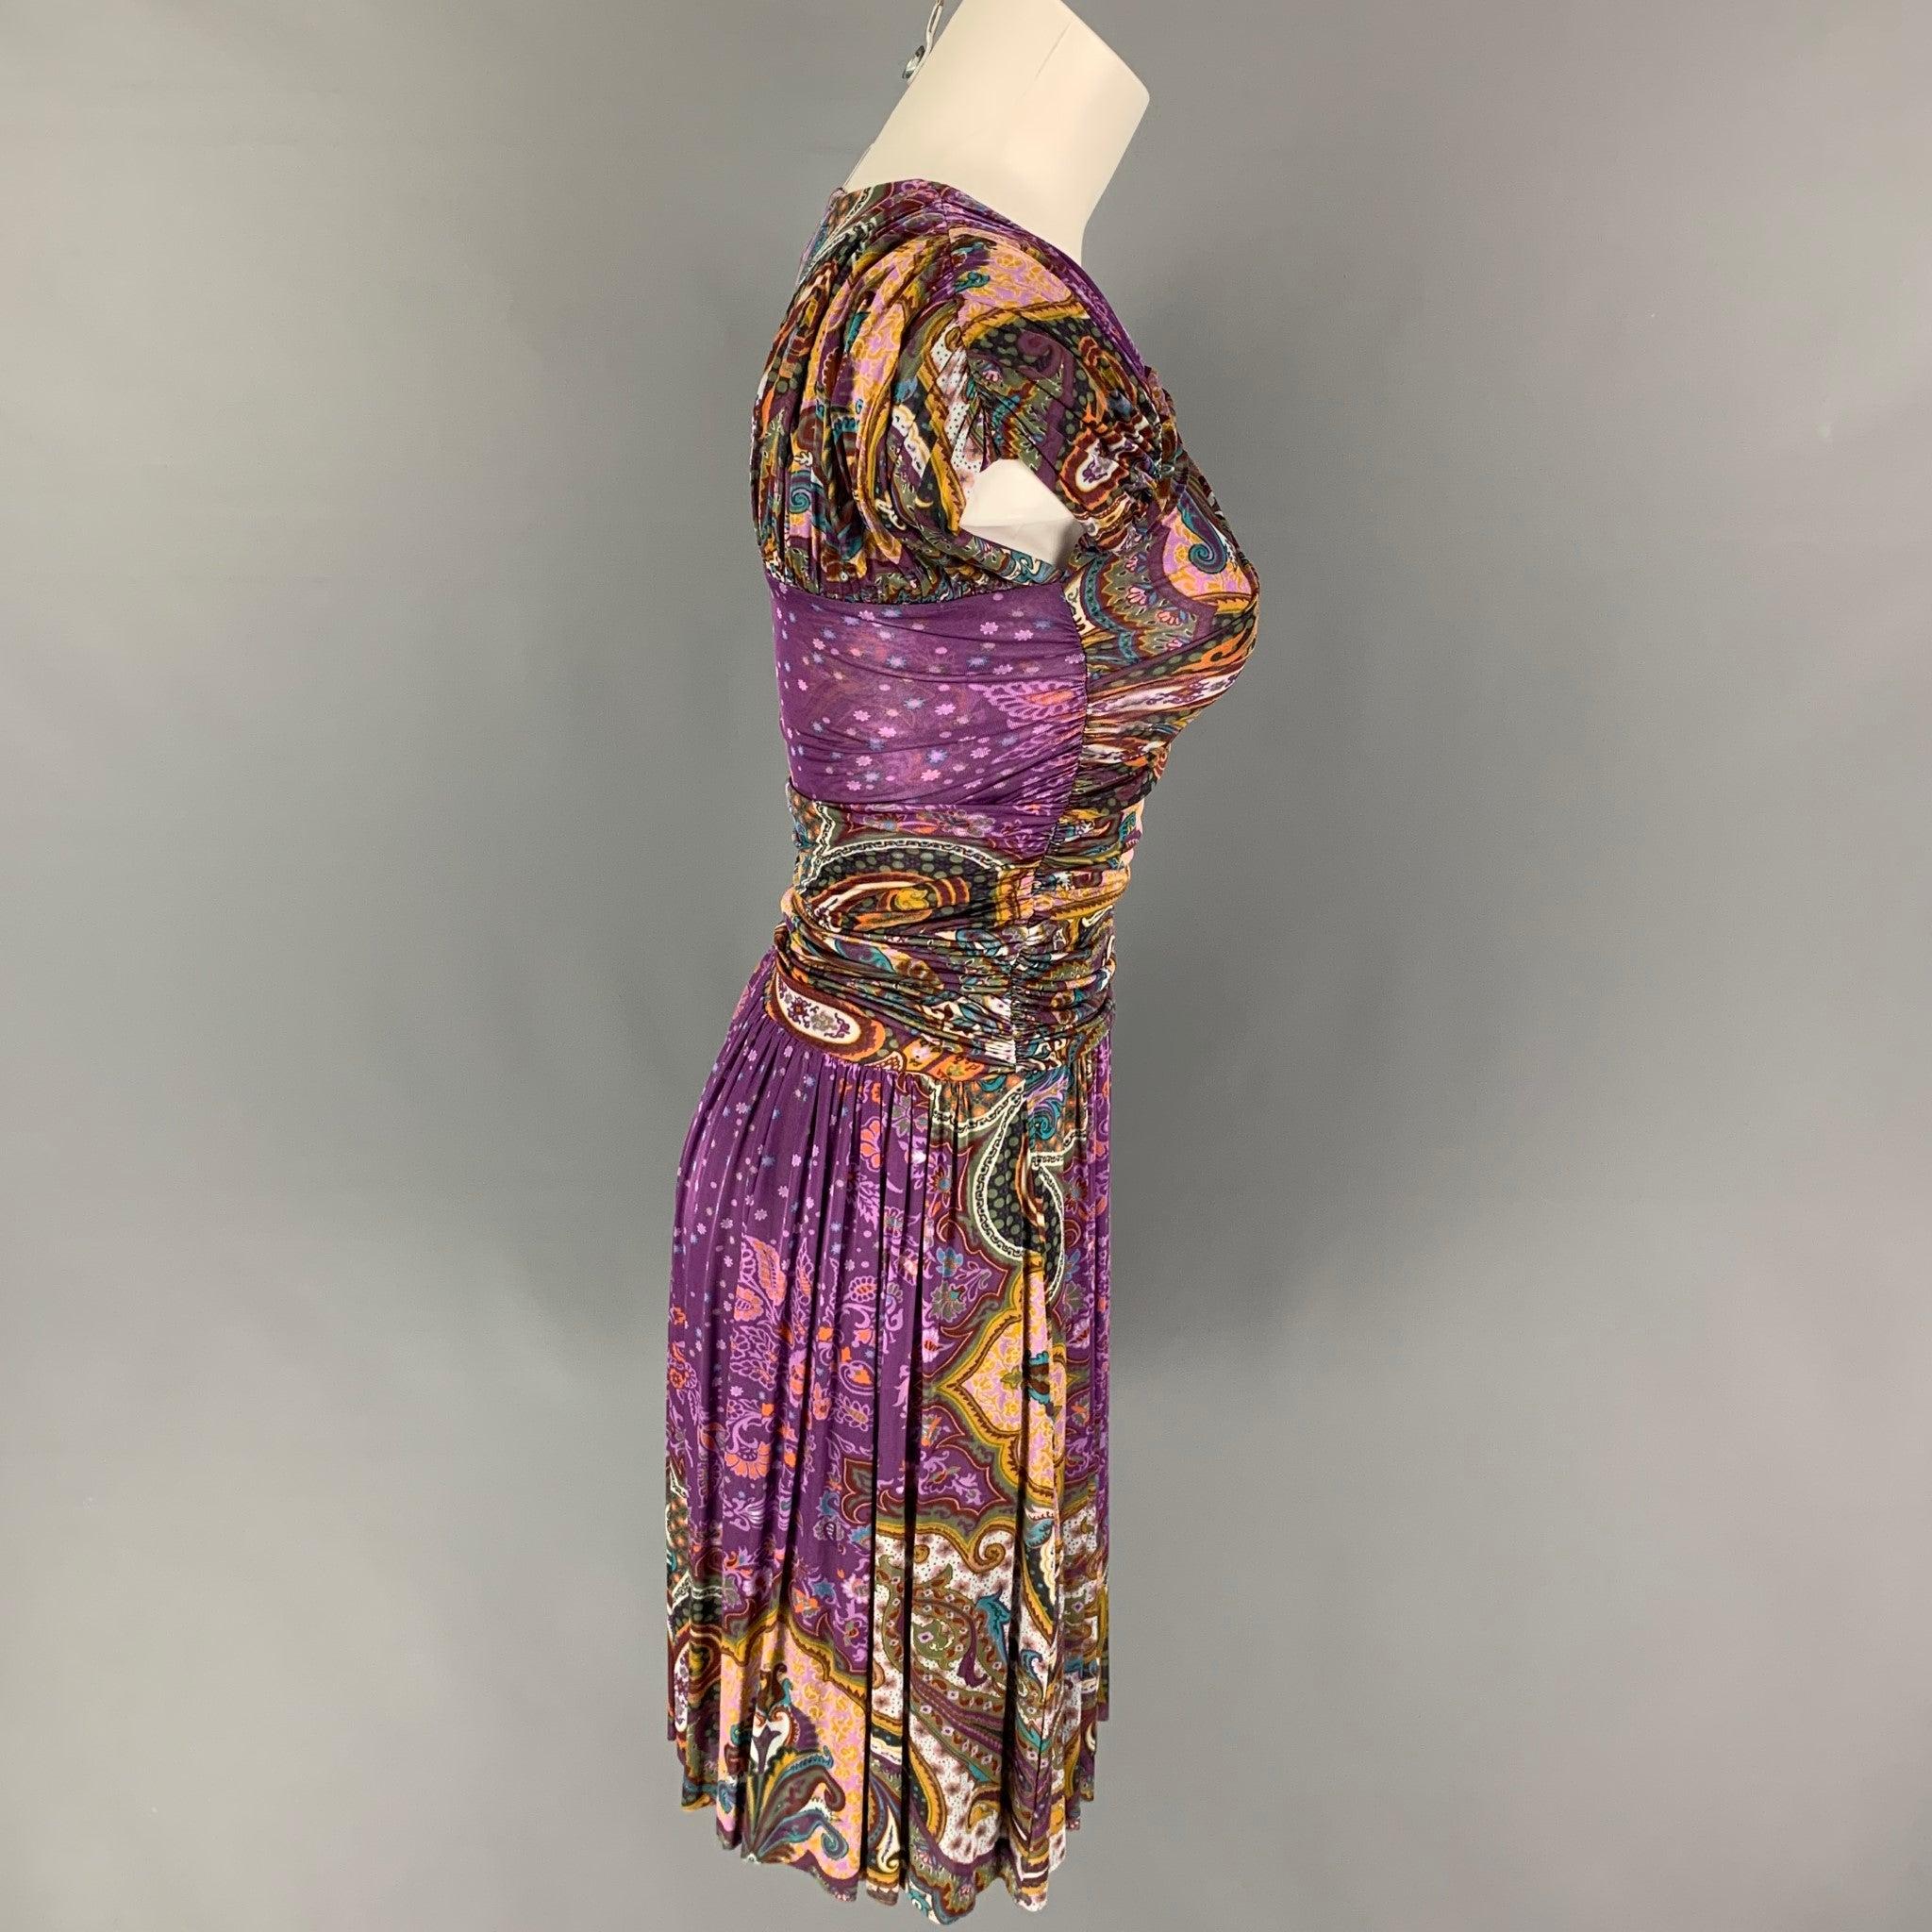 ETRO dress comes in a purple multi-color paisley viscose featuring a ruched bodice and pleated skirt. Made in Italy.
New With Tags.
 

Marked:   40 

Measurements: 
 
Shoulder: 16.5 inches  Bust: 26 inches  Waist: 22 inches  Hip: 30 inches  Length: